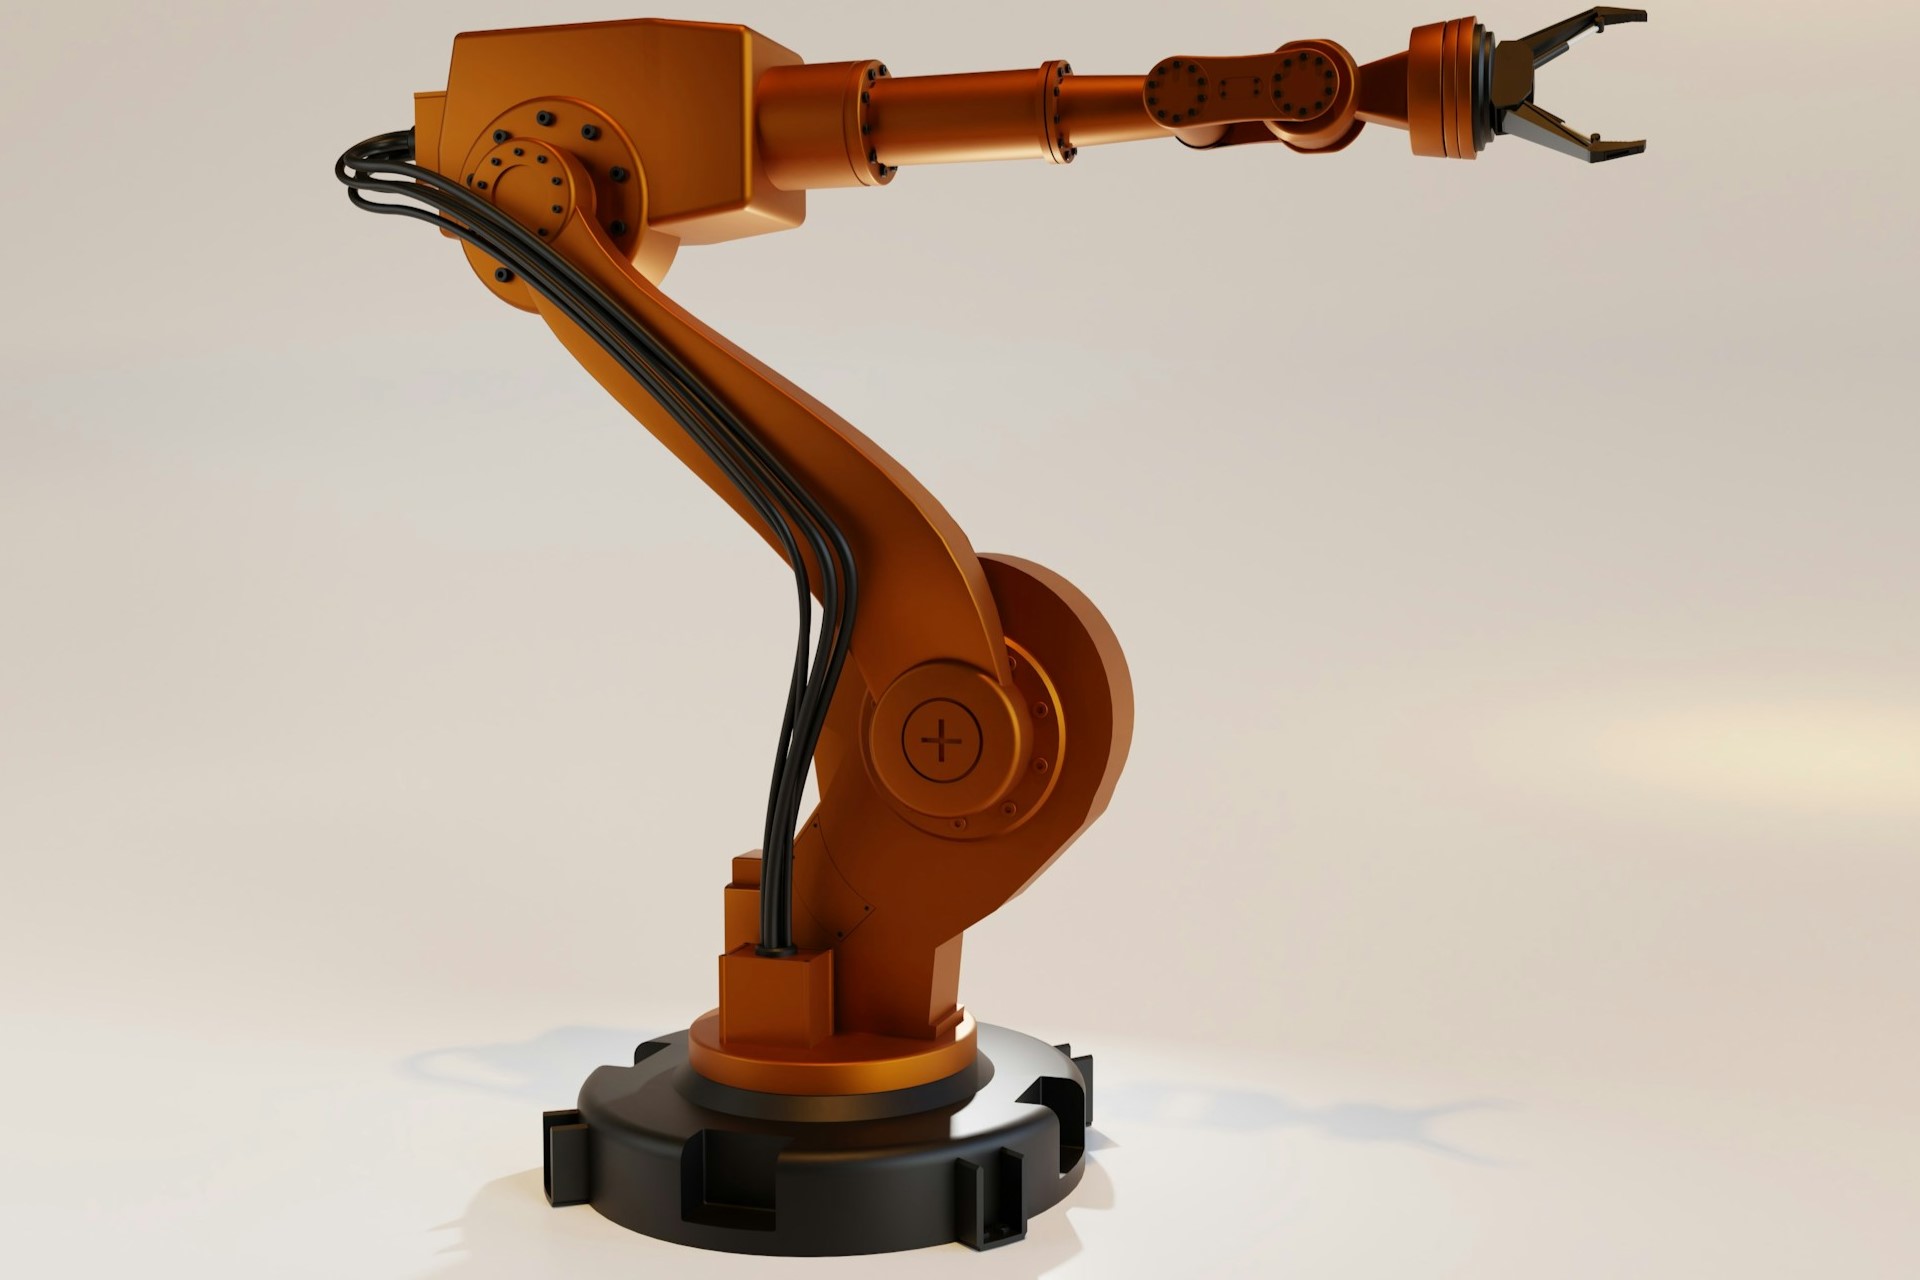 How Is Robotics Used in Business? Examples and Implications